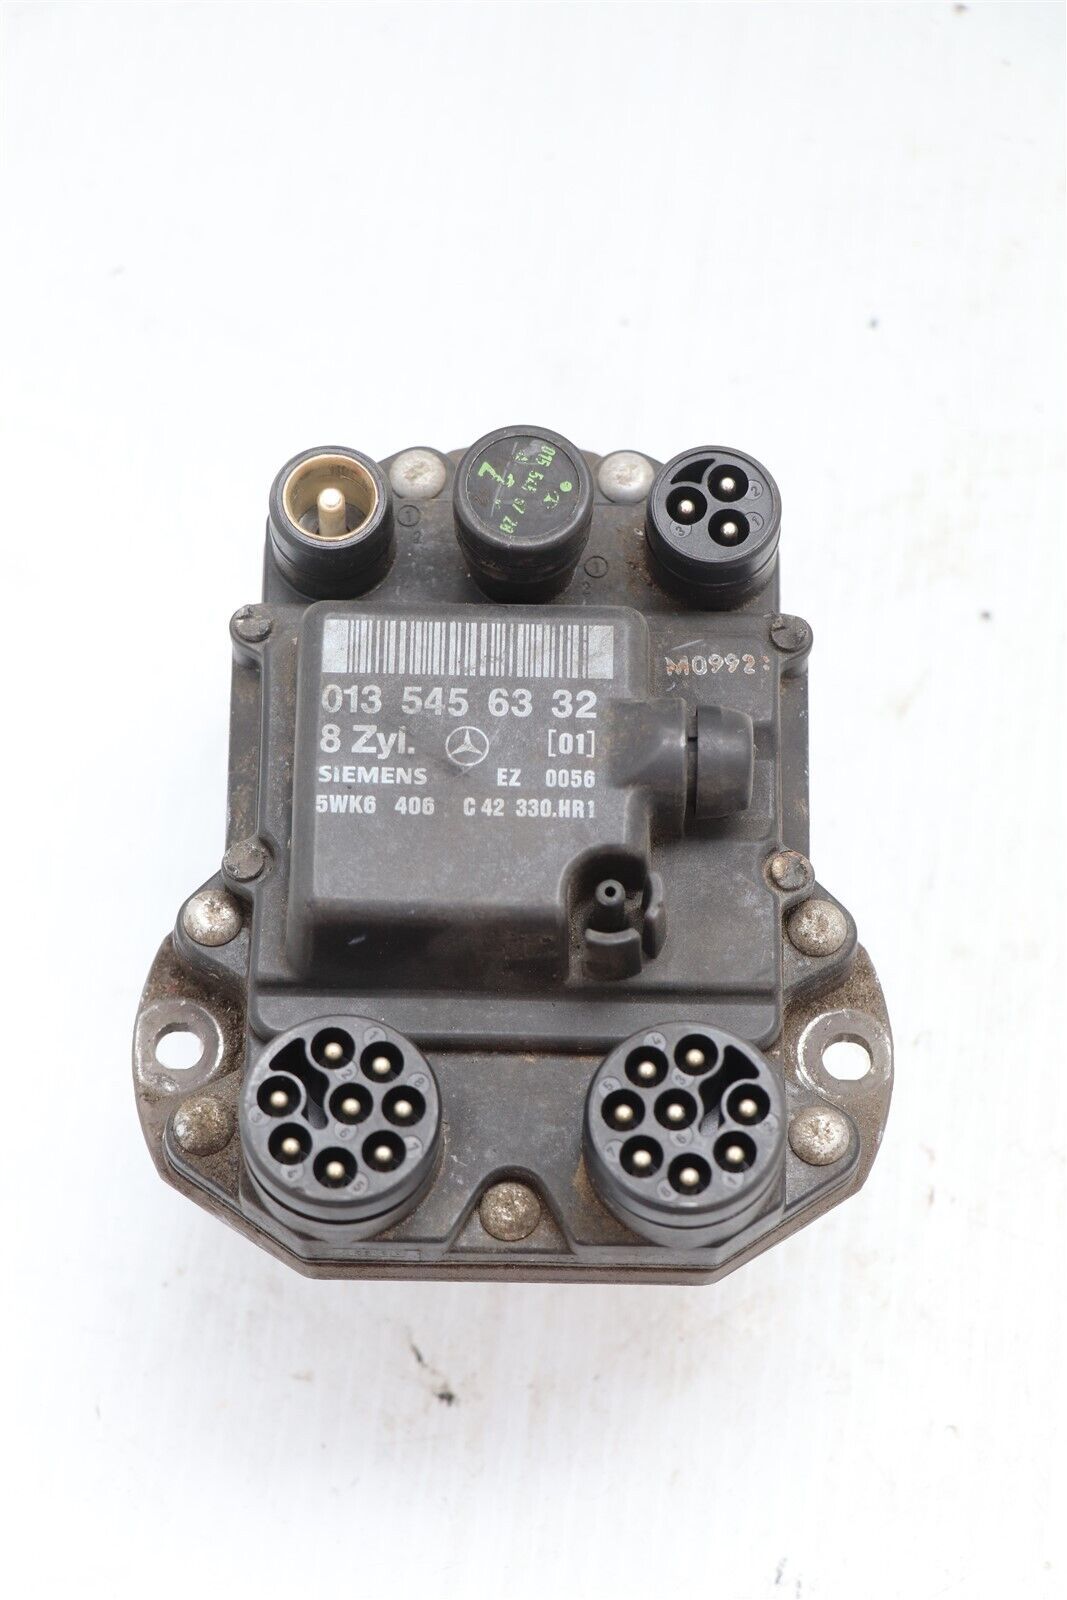 Primary image for 0135456332 Mercedes Benz Ignition Module 8Zyl 013-545-63-32